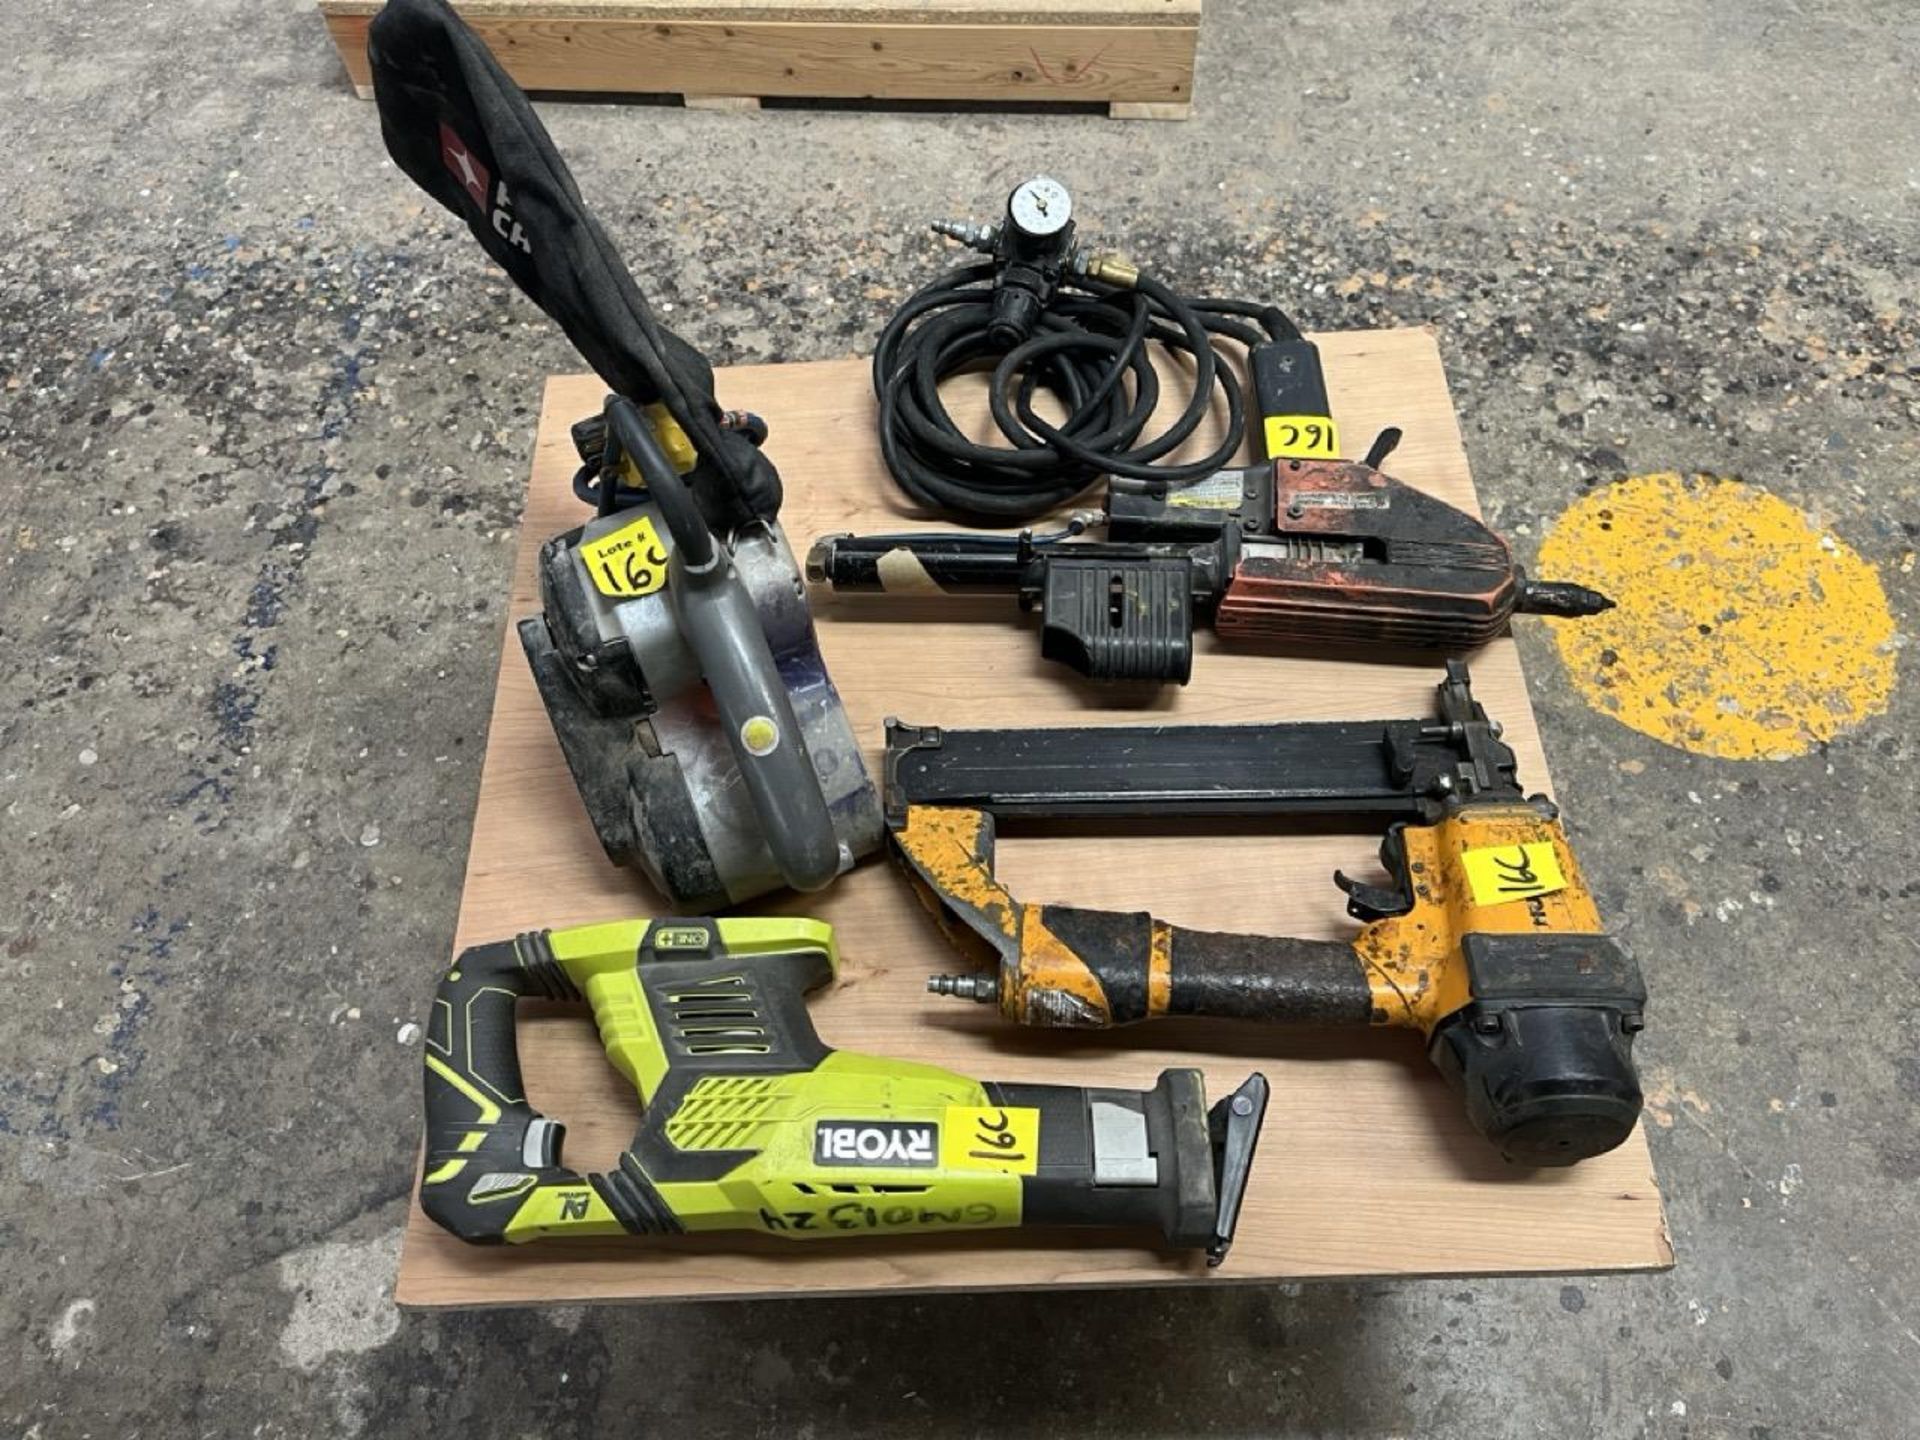 Lot of 4 pieces contains: 1 Porter electric sander with dust collector; 1 Ryobi wood saw without ba - Image 4 of 14